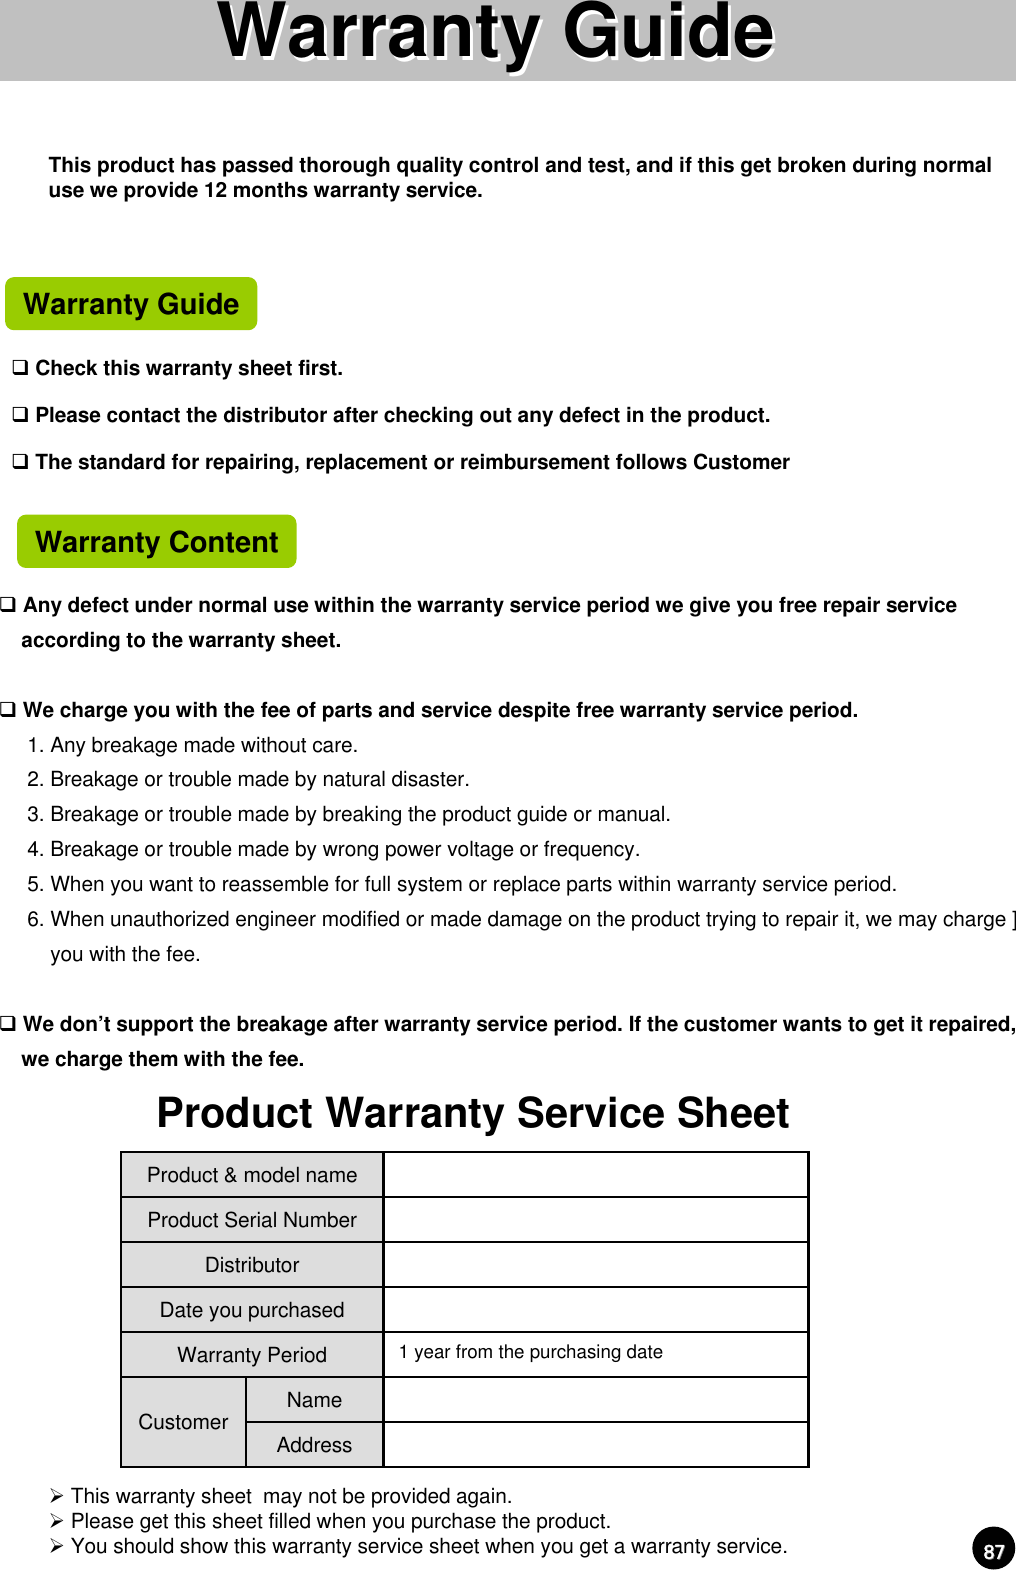 8787Any defect under normal use within the warranty service period we give you free repair service according to the warranty sheet.We charge you with the fee of parts and service despite free warranty service period.1. Any breakage made without care.2. Breakage or trouble made by natural disaster.3. Breakage or trouble made by breaking the product guide or manual.4. Breakage or trouble made by wrong power voltage or frequency.5. When you want to reassemble for full system or replace parts within warranty service period.6. When unauthorized engineer modified or made damage on the product trying to repair it, we may charge ]you with the fee.We don’t support the breakage after warranty service period. If the customer wants to get it repaired, we charge them with the fee.¾This warranty sheet  may not be provided again.¾Please get this sheet filled when you purchase the product.¾You should show this warranty service sheet when you get a warranty service.Warranty GuideWarranty GuideAddressNameCustomer1 year from the purchasing dateWarranty PeriodDate you purchasedDistributorProduct Serial NumberProduct &amp; model nameProduct Warranty Service SheetThis product has passed thorough quality control and test, and if this get broken during normal use we provide 12 months warranty service.Warranty GuideCheck this warranty sheet first.Please contact the distributor after checking out any defect in the product. The standard for repairing, replacement or reimbursement follows CustomerWarranty Content